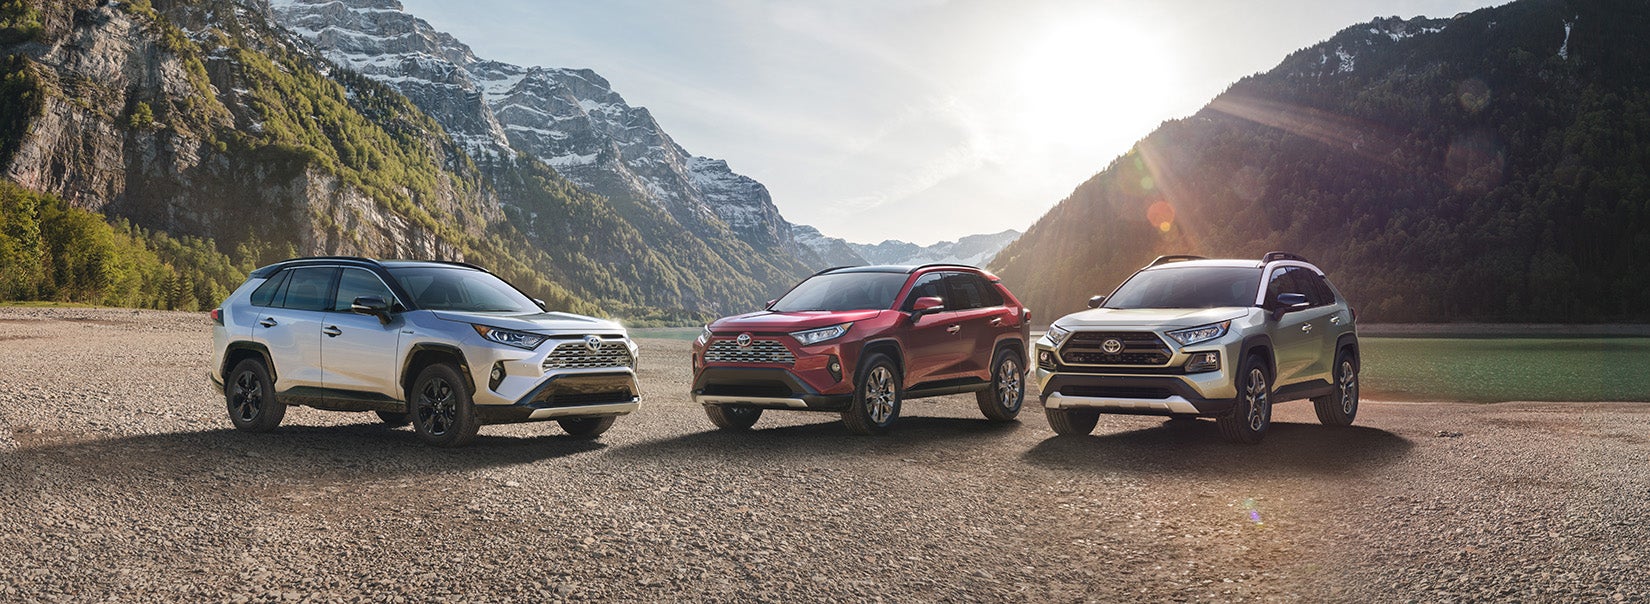 Bennett Toyota of Lebanon is a Car Dealership near Cleona, PA | Multiple 2020 Toyota RAV4 vehicles parked in front of mountains